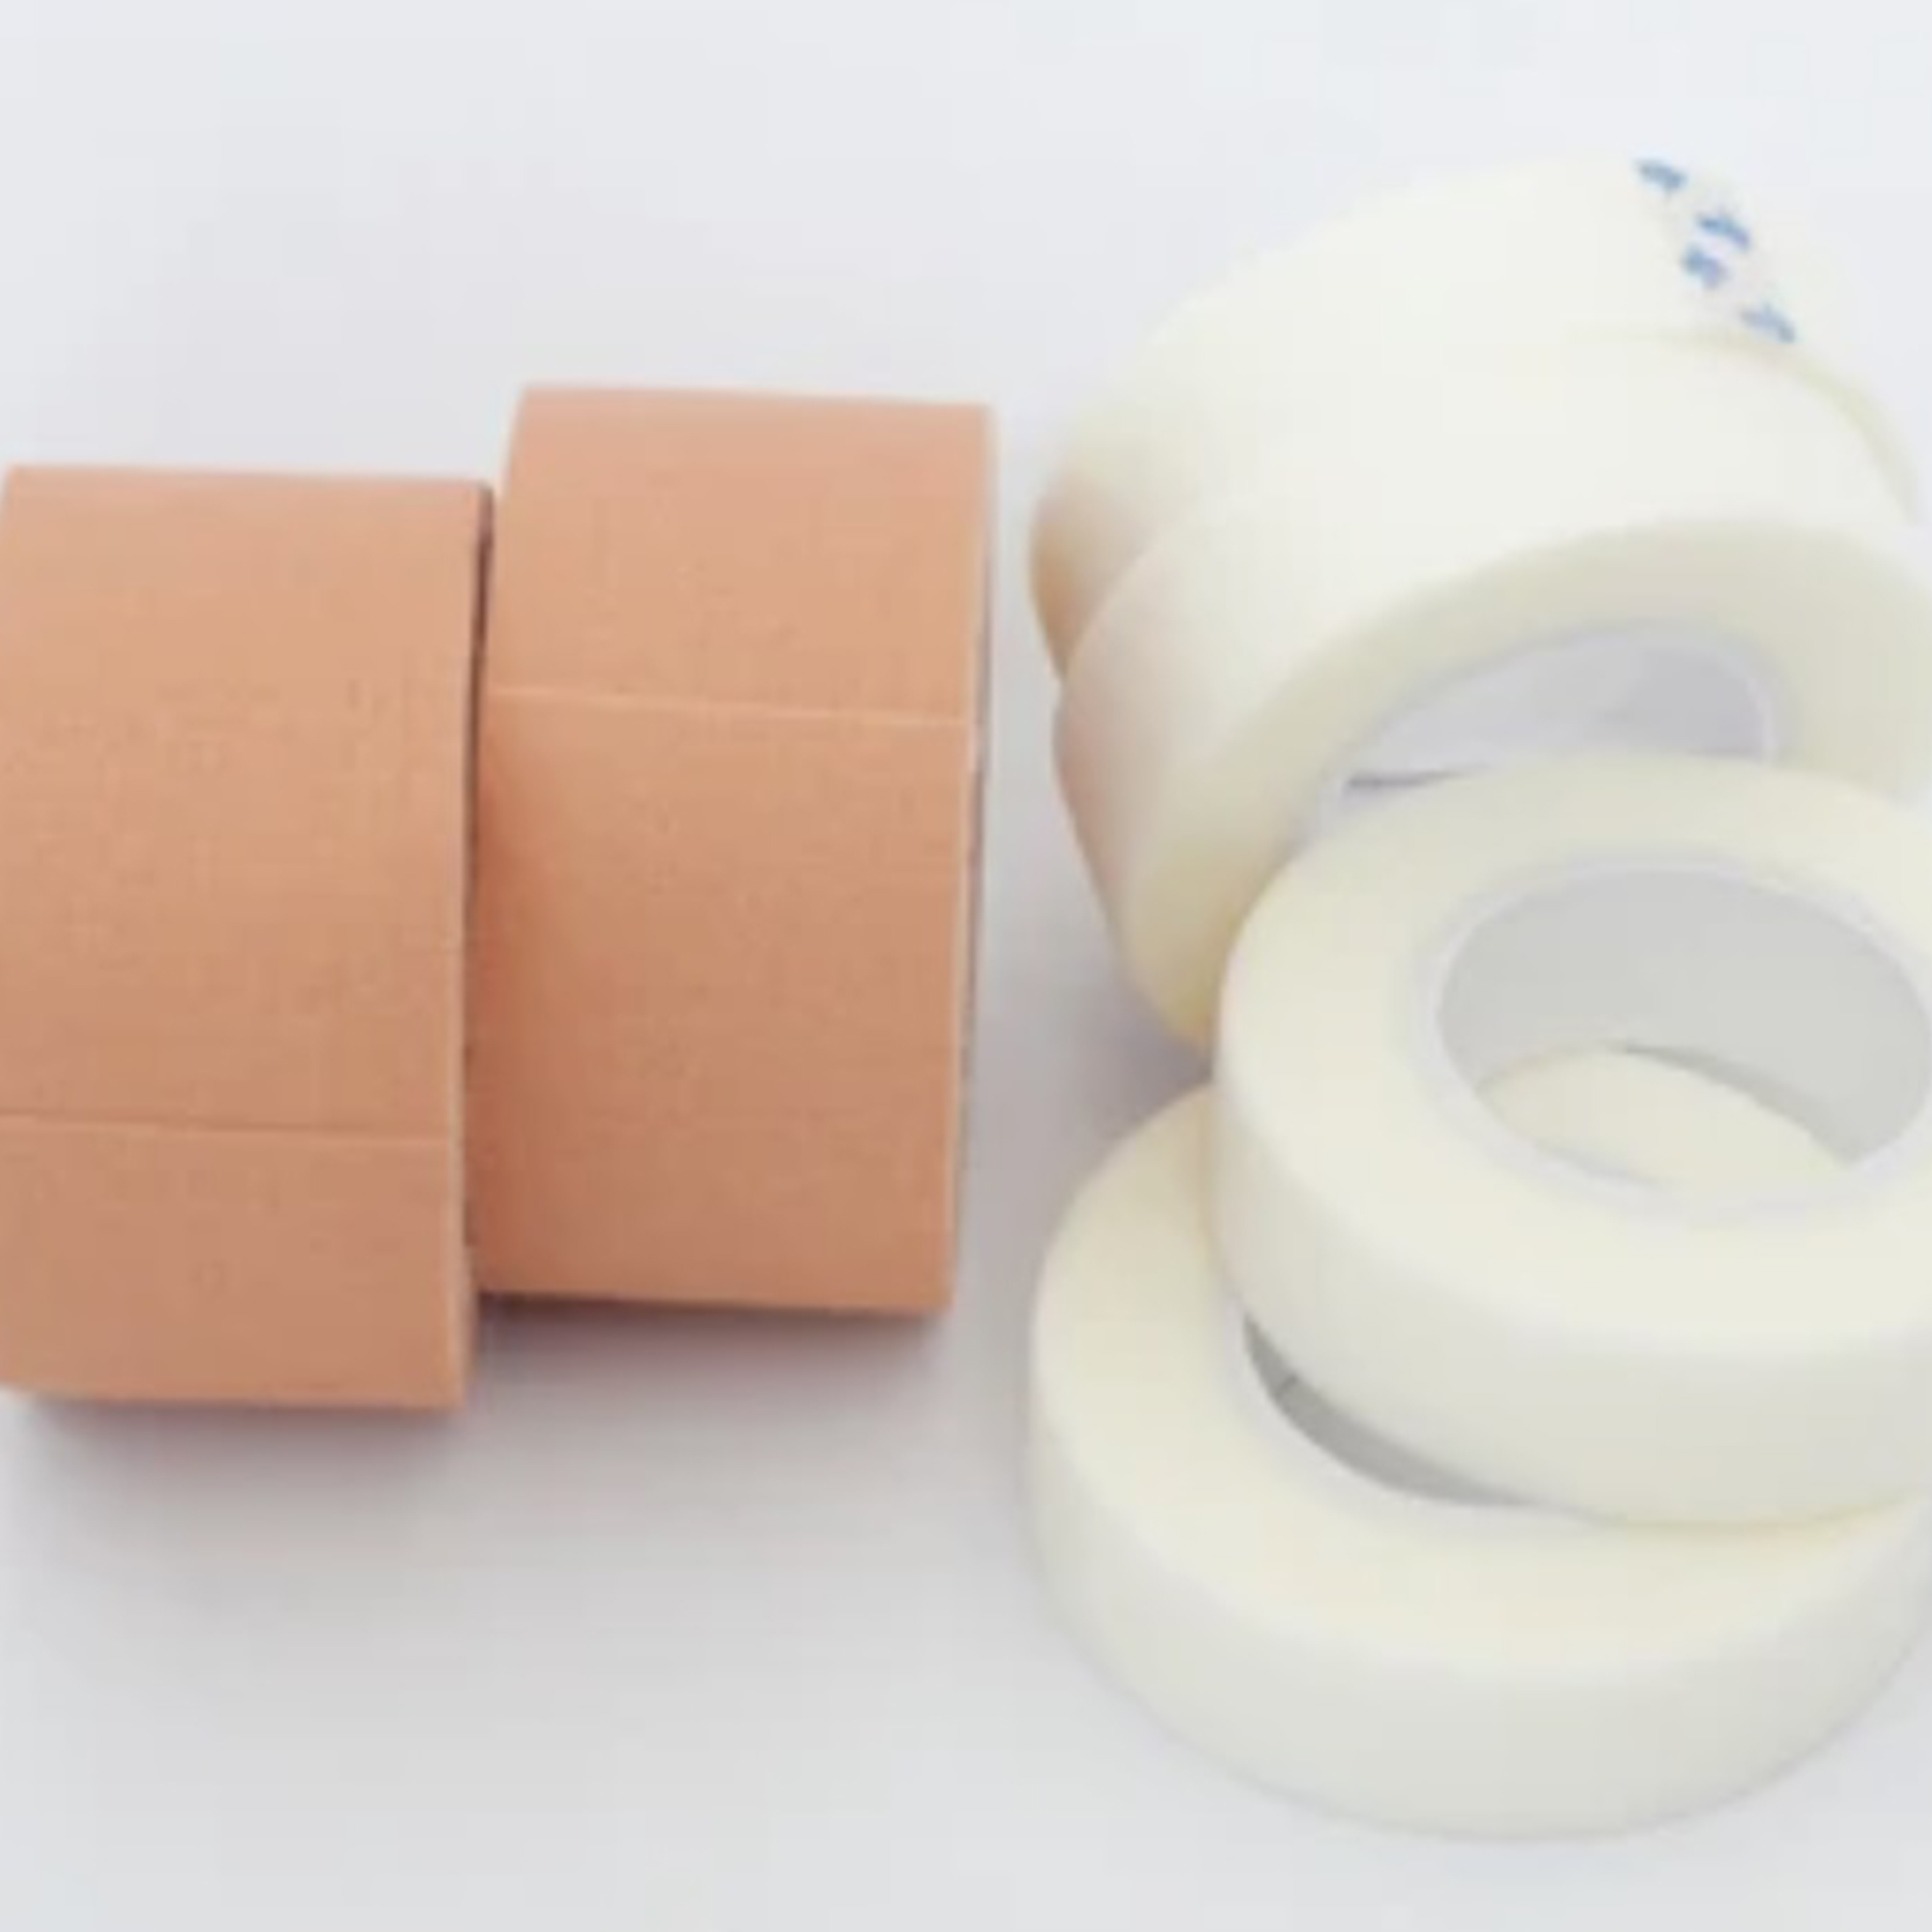 Medical practice/MEDICAL TAPES, PLASTERS/Medical Adhesive Tapes